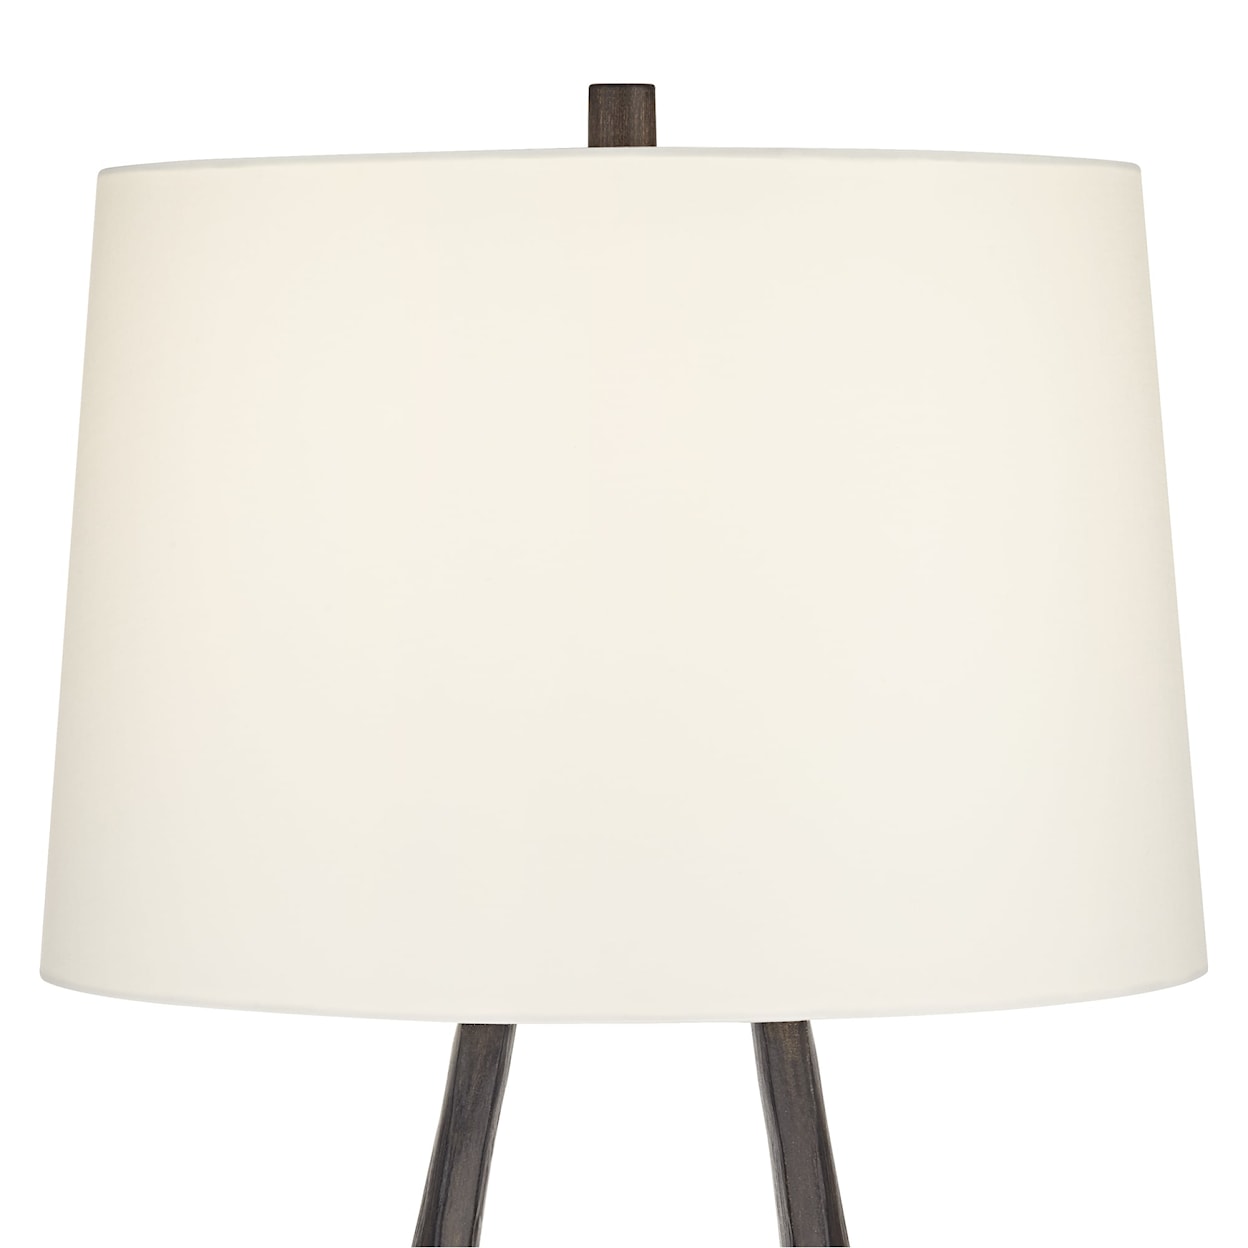 Pacific Coast Lighting Pacific Coast Lighting TL-30.25" Poly oval lamp